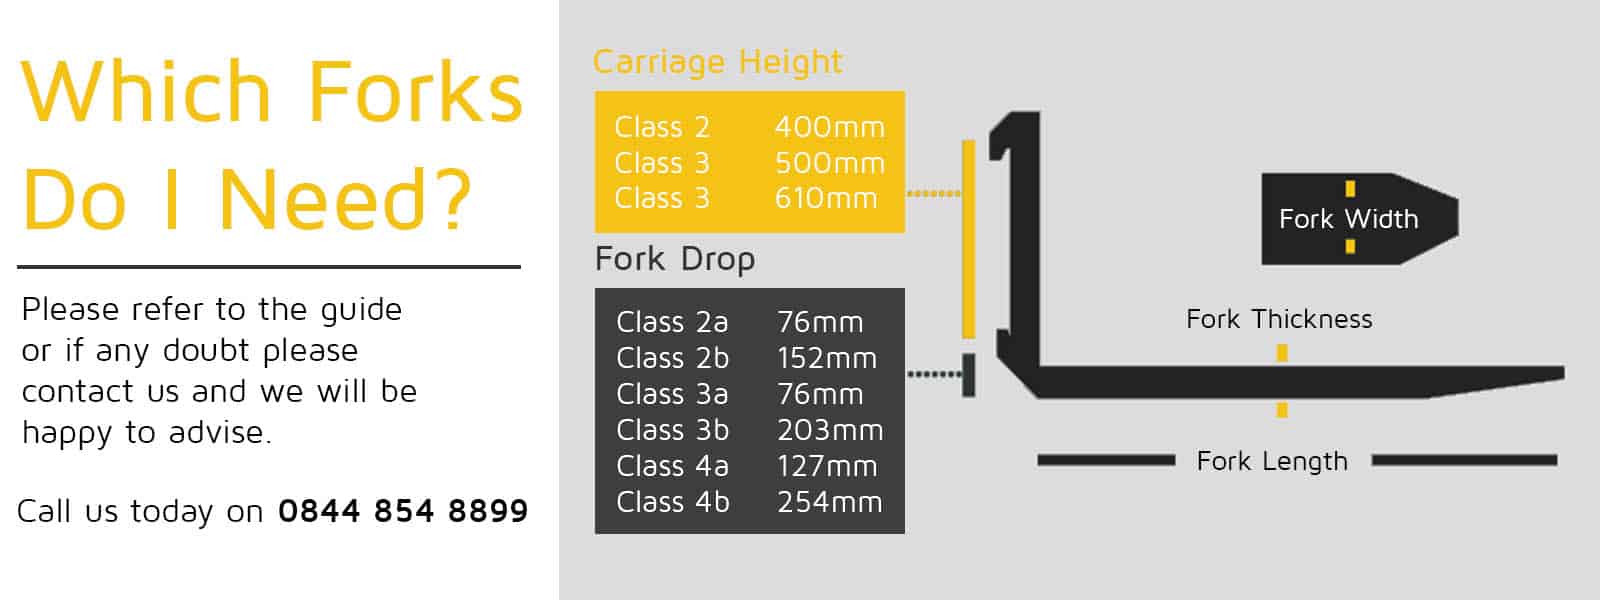 Forkway - Which Forks do I need?